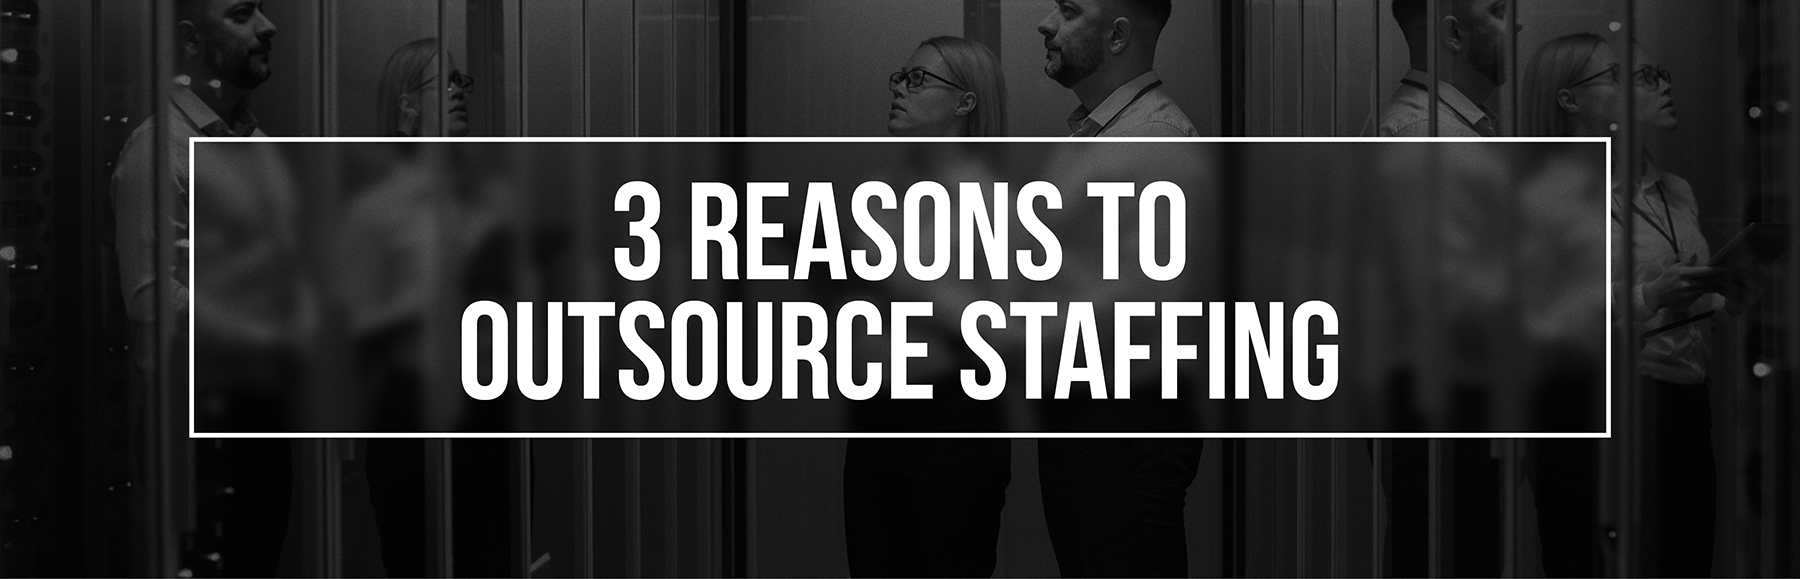 3-reasons-to-outsource